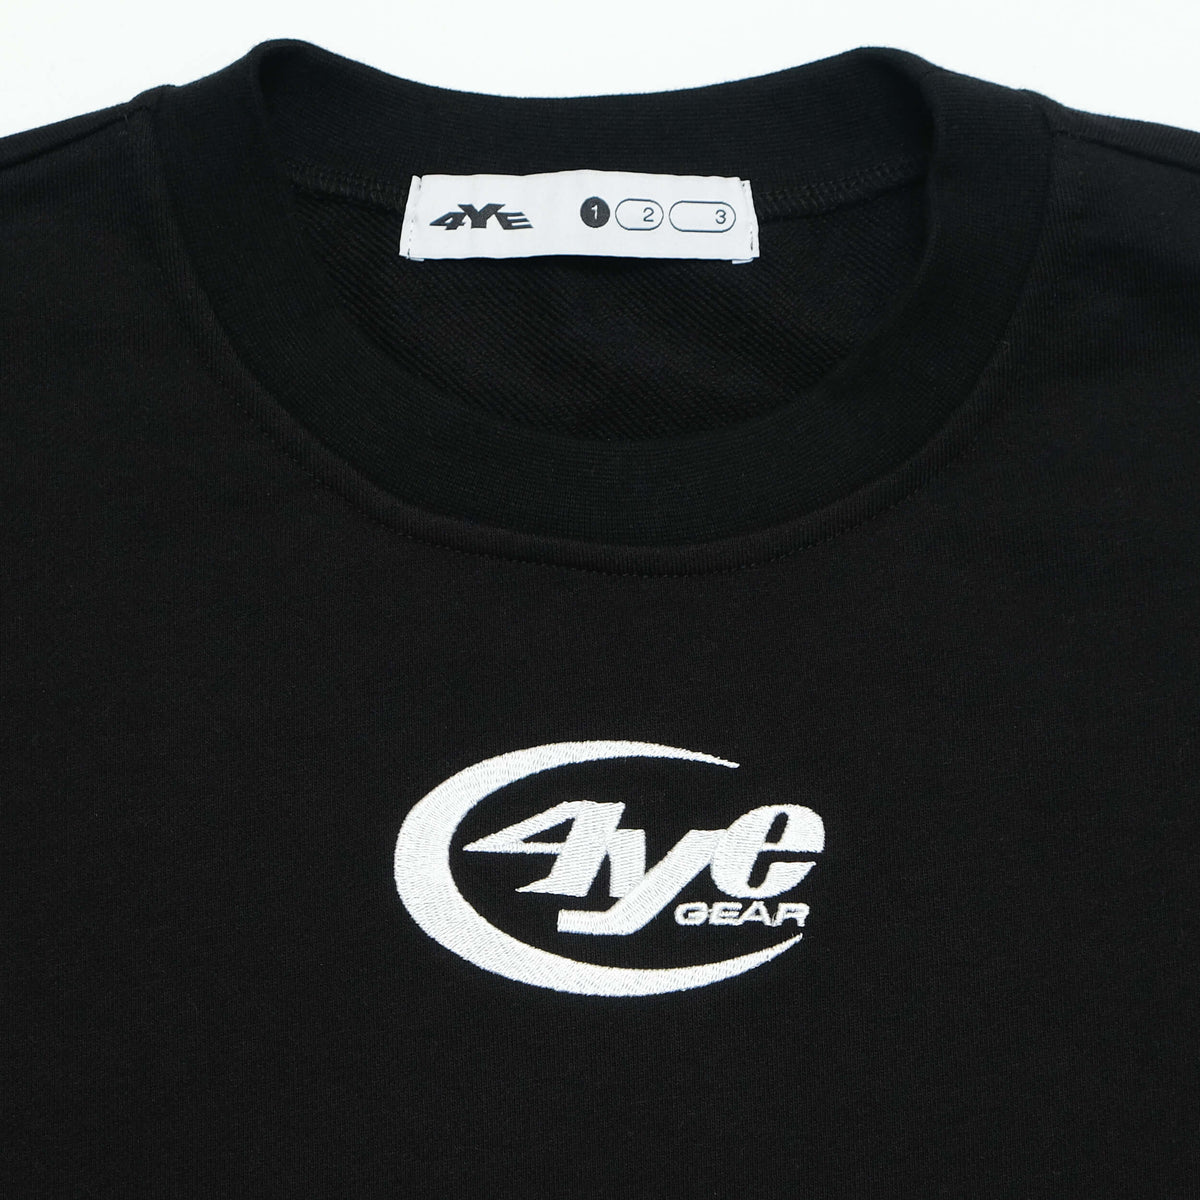 Detail image of the 4YE Gear Logo in white on the Raw Hem Crew